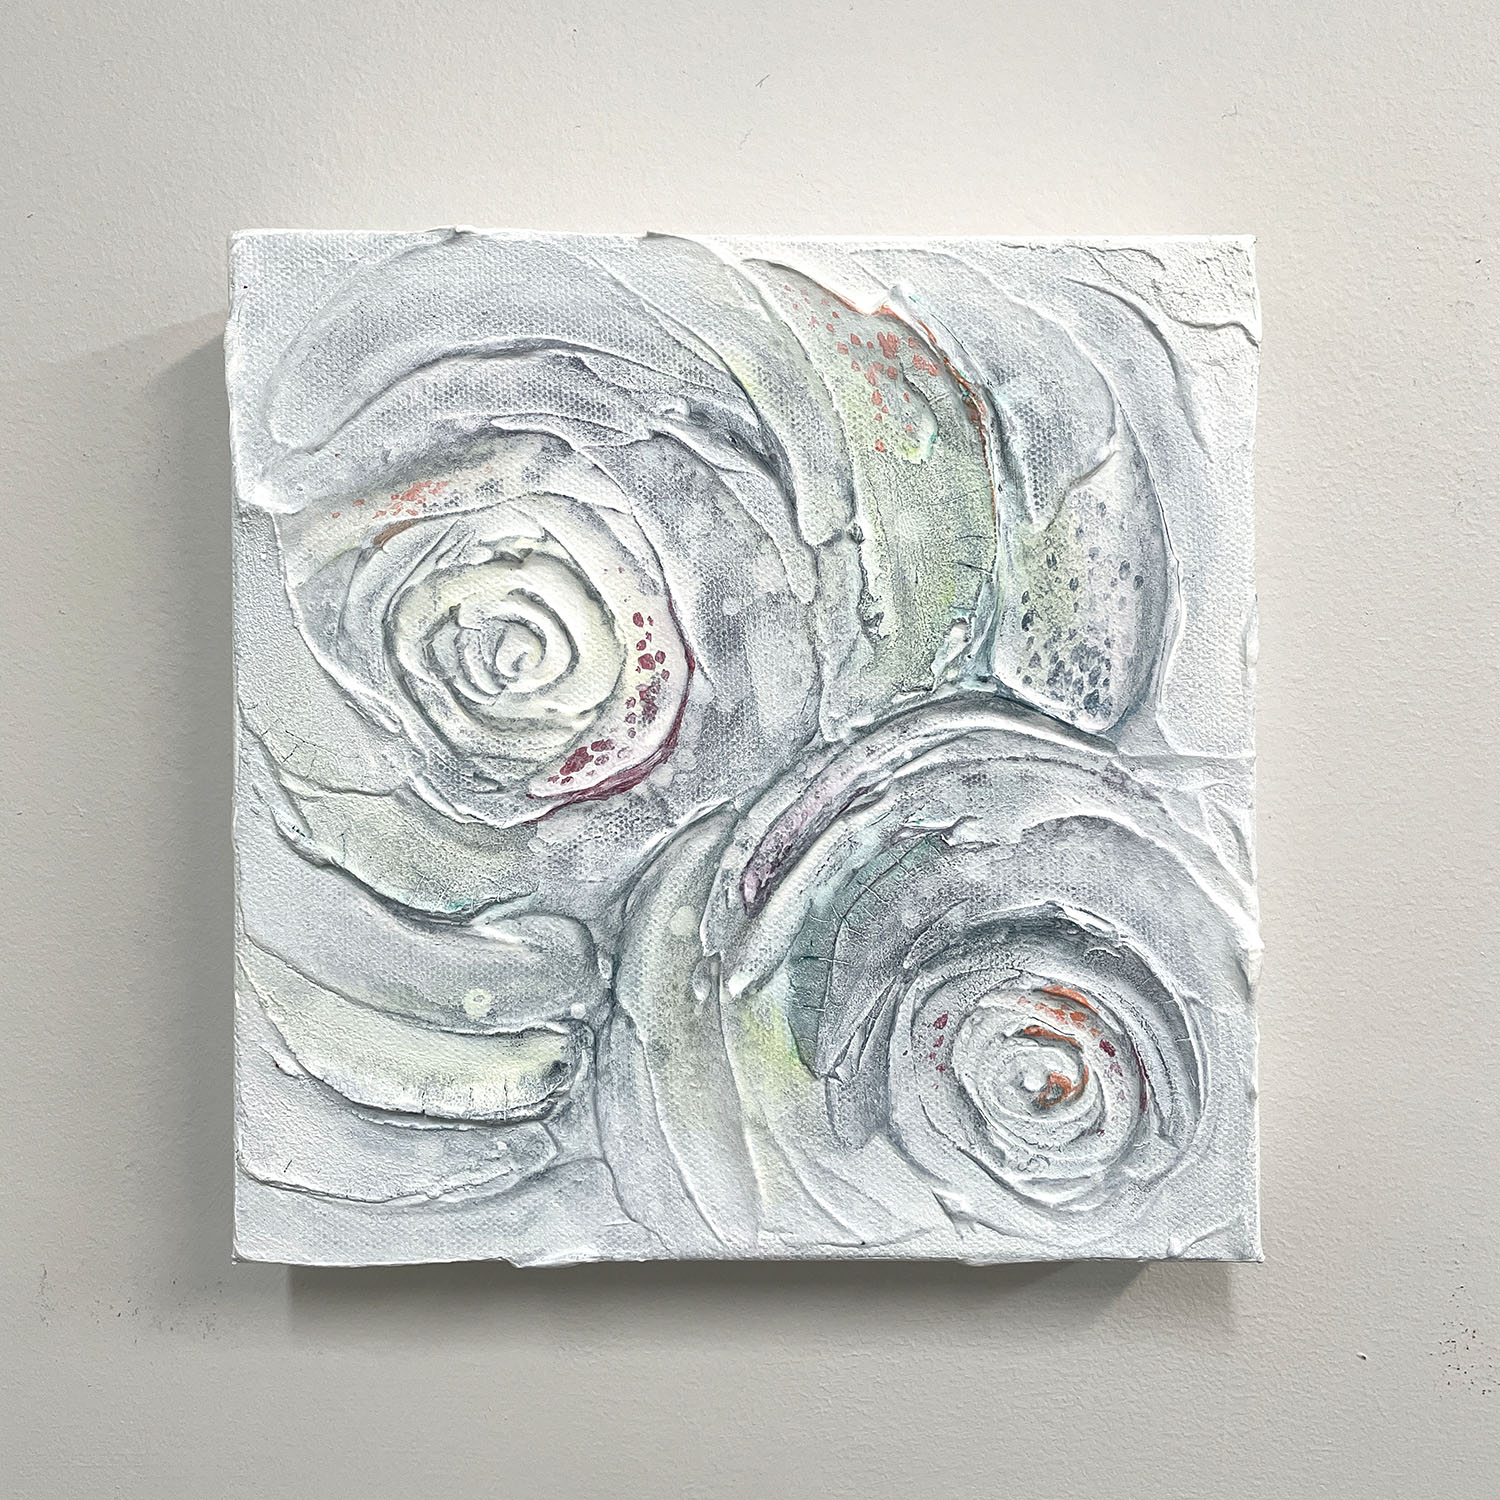 Healing1 abstract rose painting